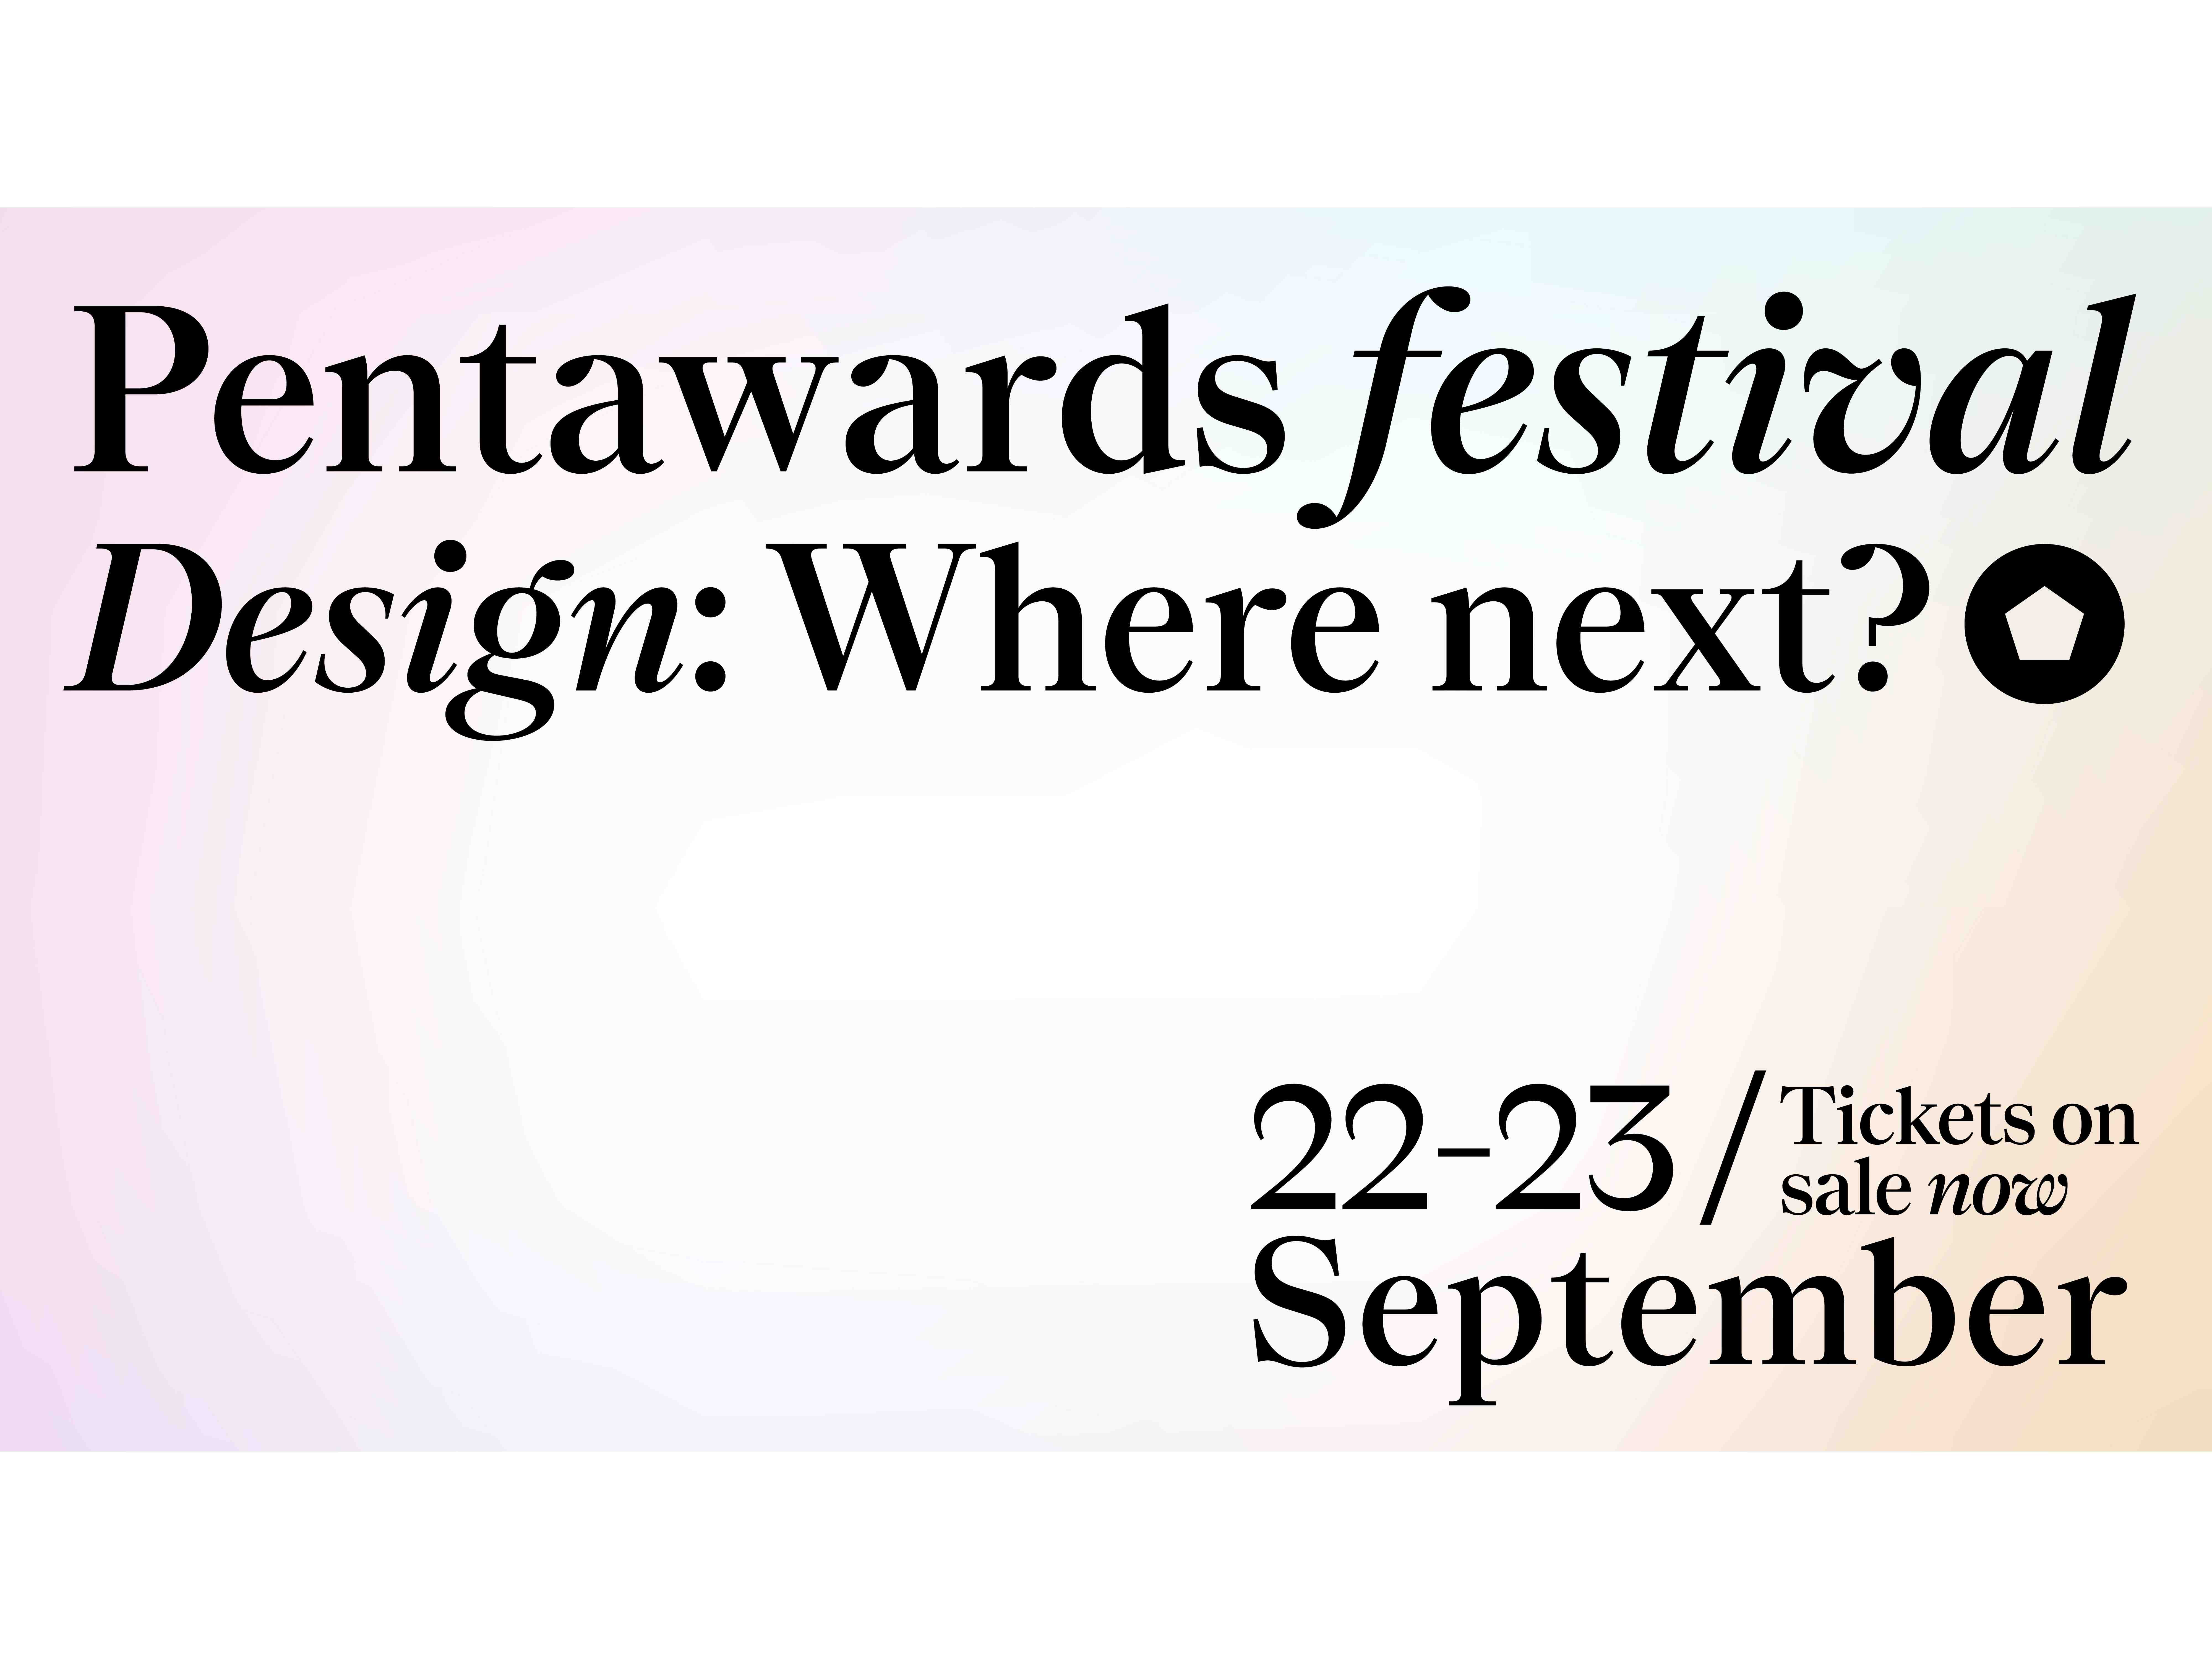 Pentawards announces its first ever in-person festival